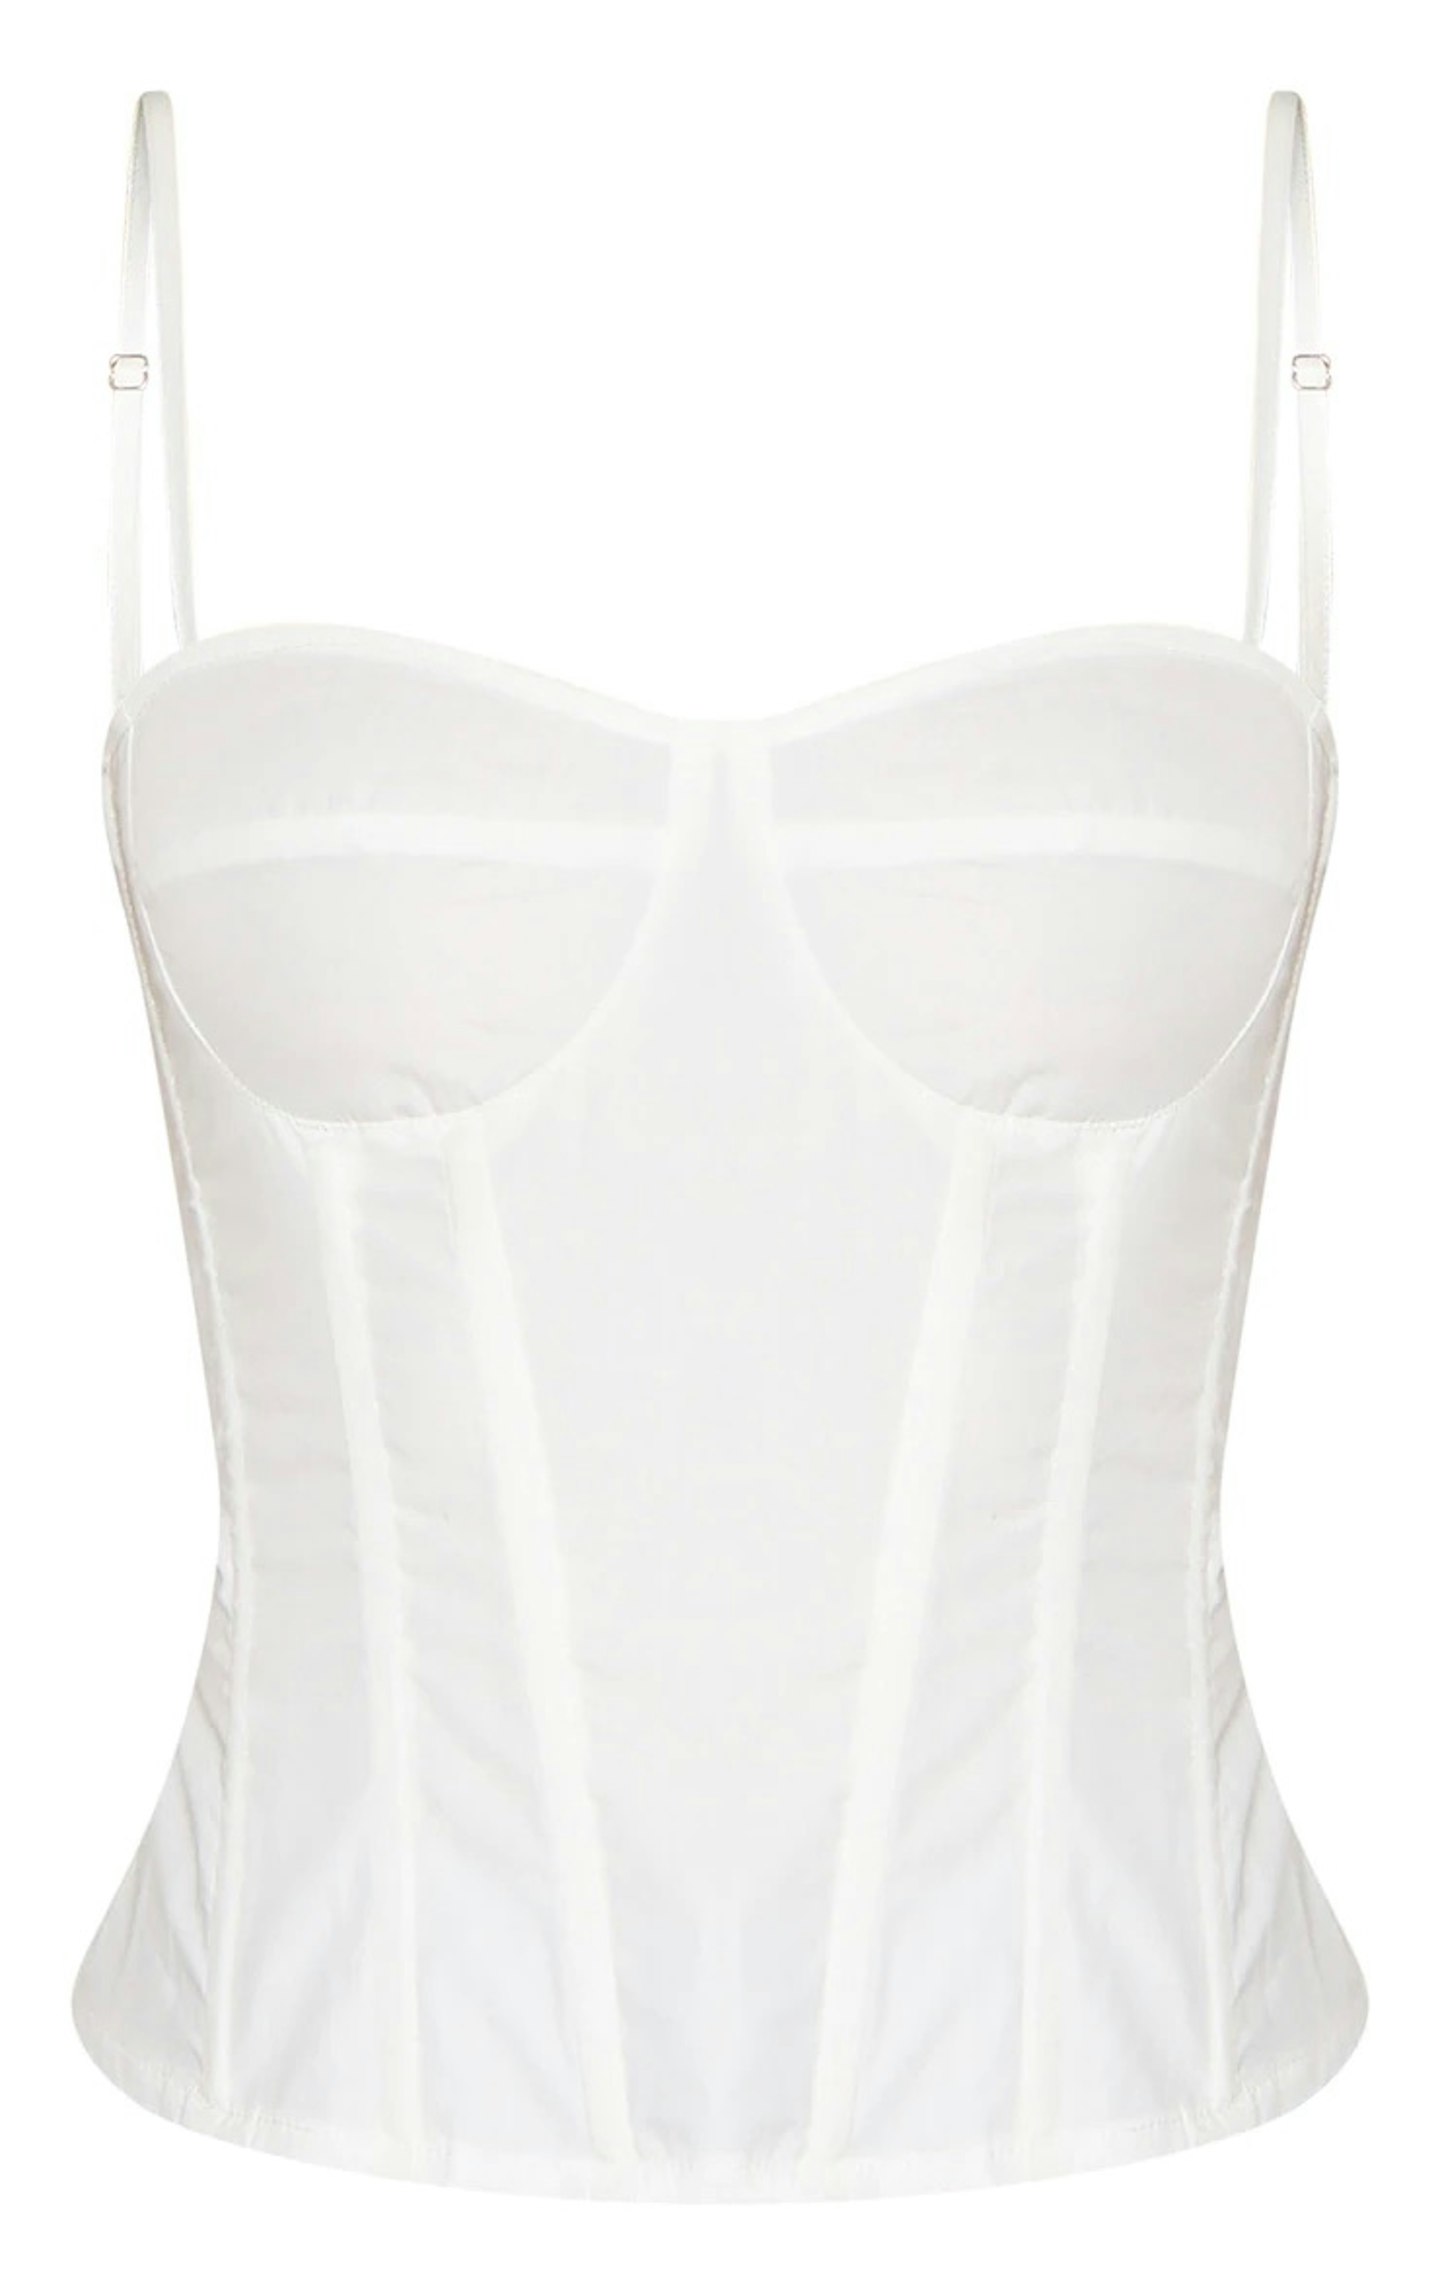 PrettyLittleThing white structured corset top